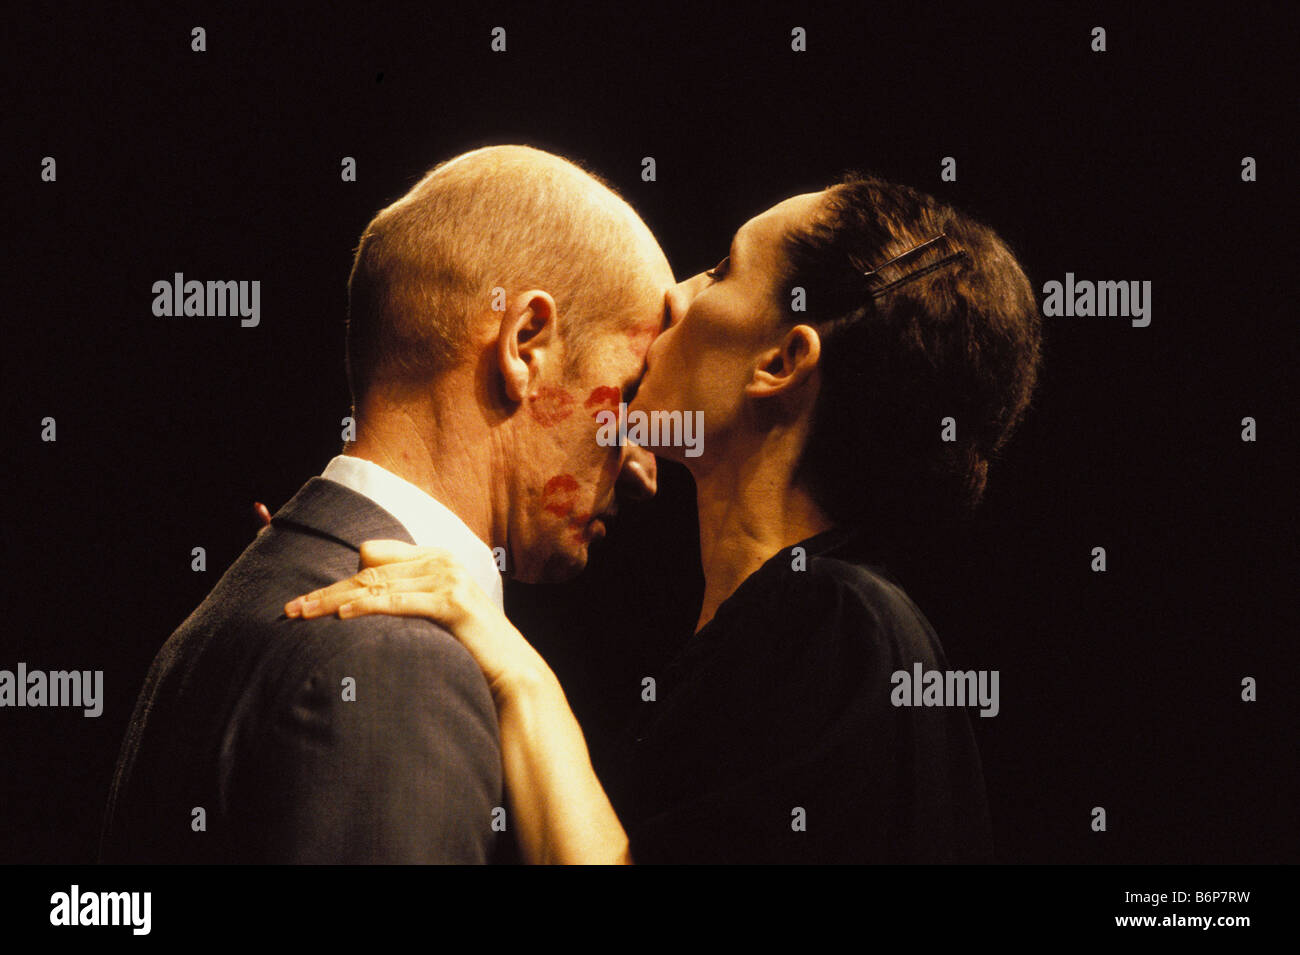 dance theatre '1980' by Pina Bausch with dancer Nazareth Panadero and Jacob Andersen, kissing Stock Photo